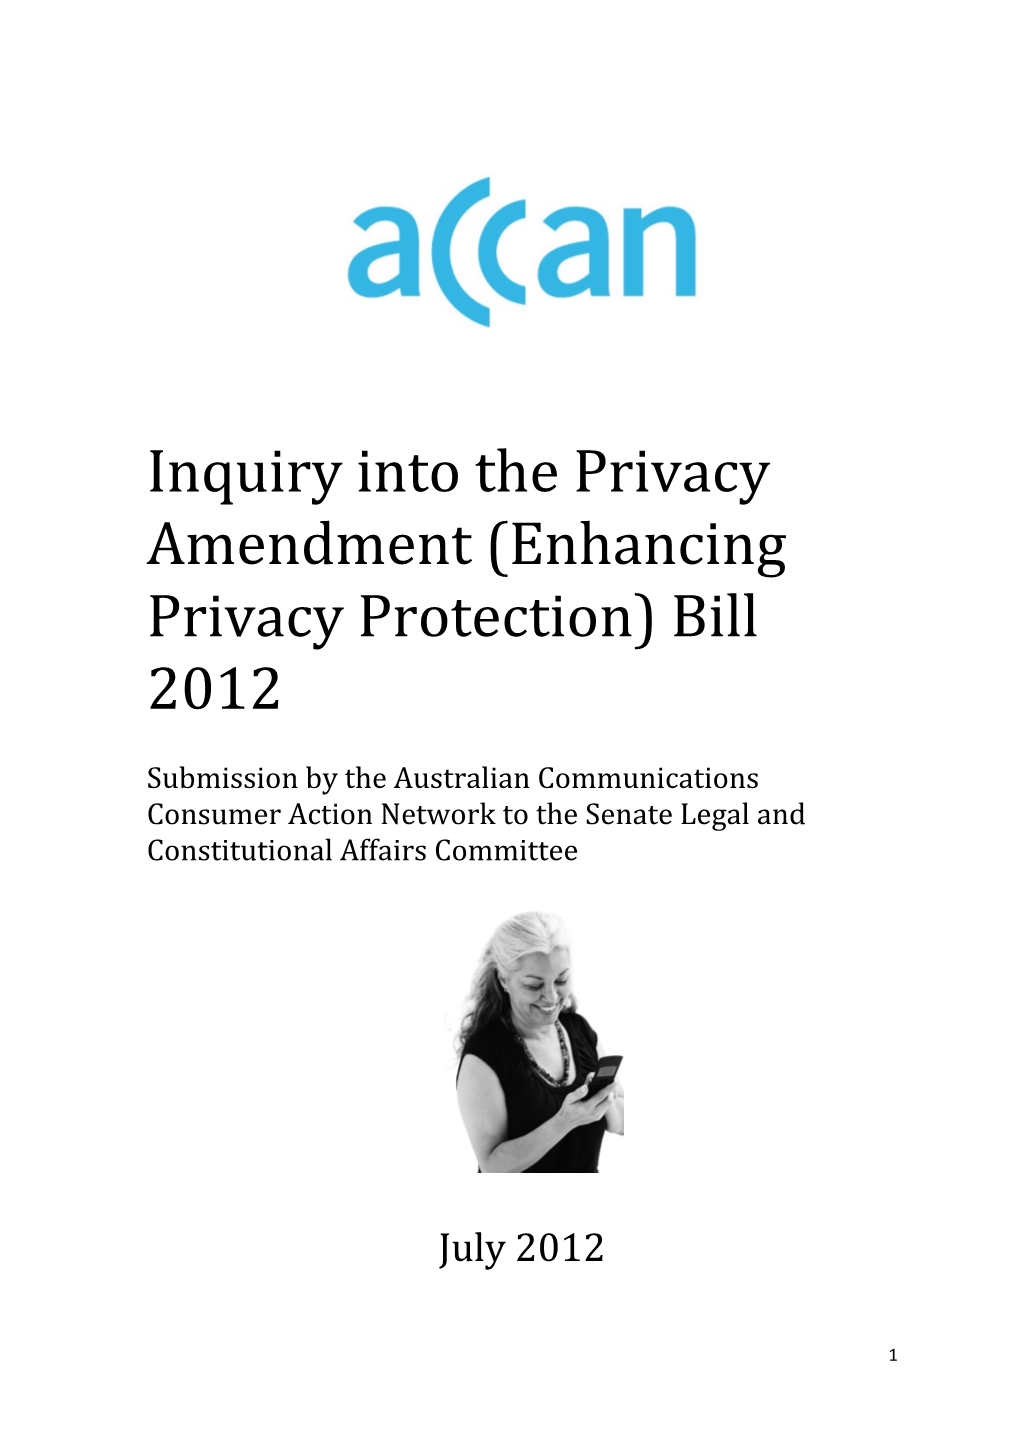 Inquiry Into the Privacy Amendment (Enhancing Privacy Protection) Bill 2012